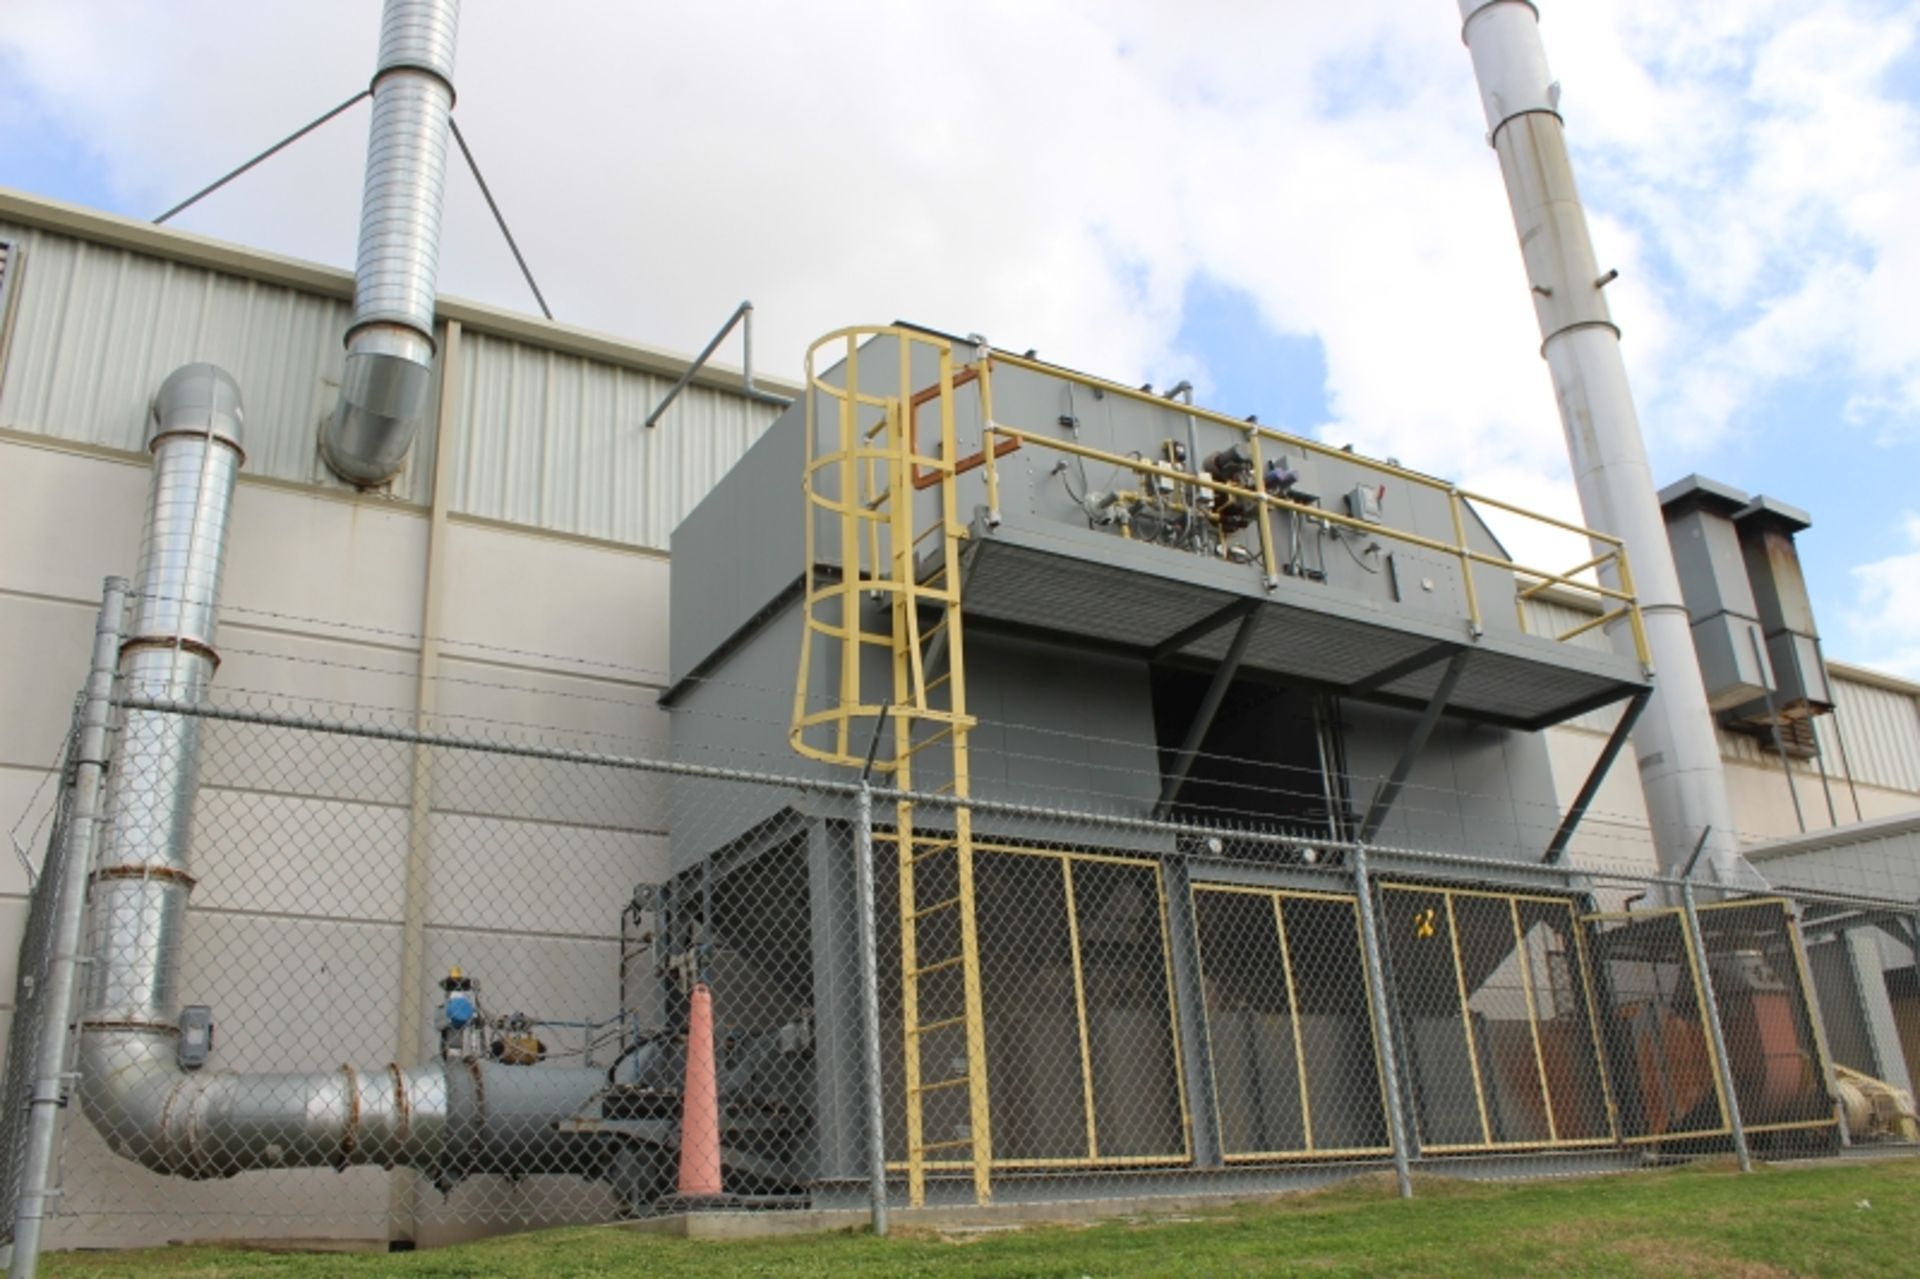 Epcon Regenerative Thermal Oxidizer System w/ burners, gas trains, inlet isolation, fresh air - Image 2 of 2